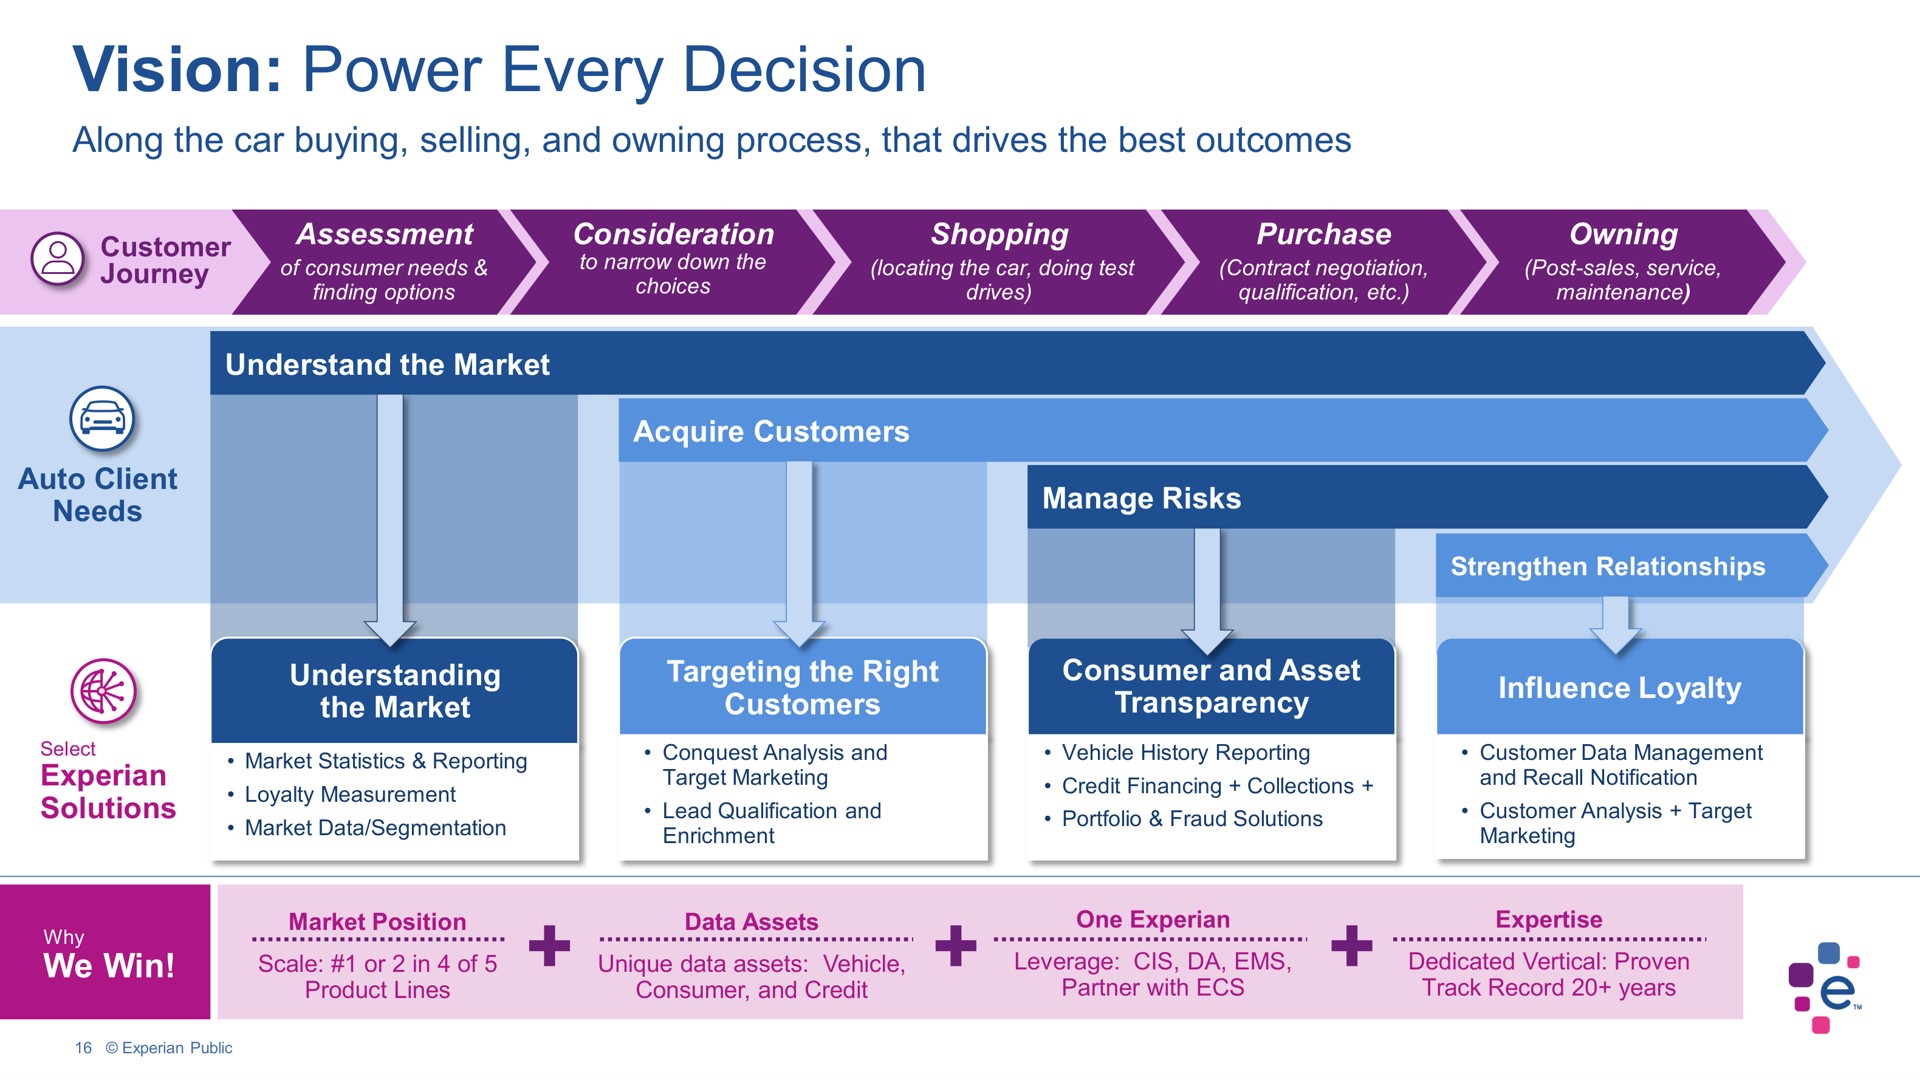 vision power every decision | Experian